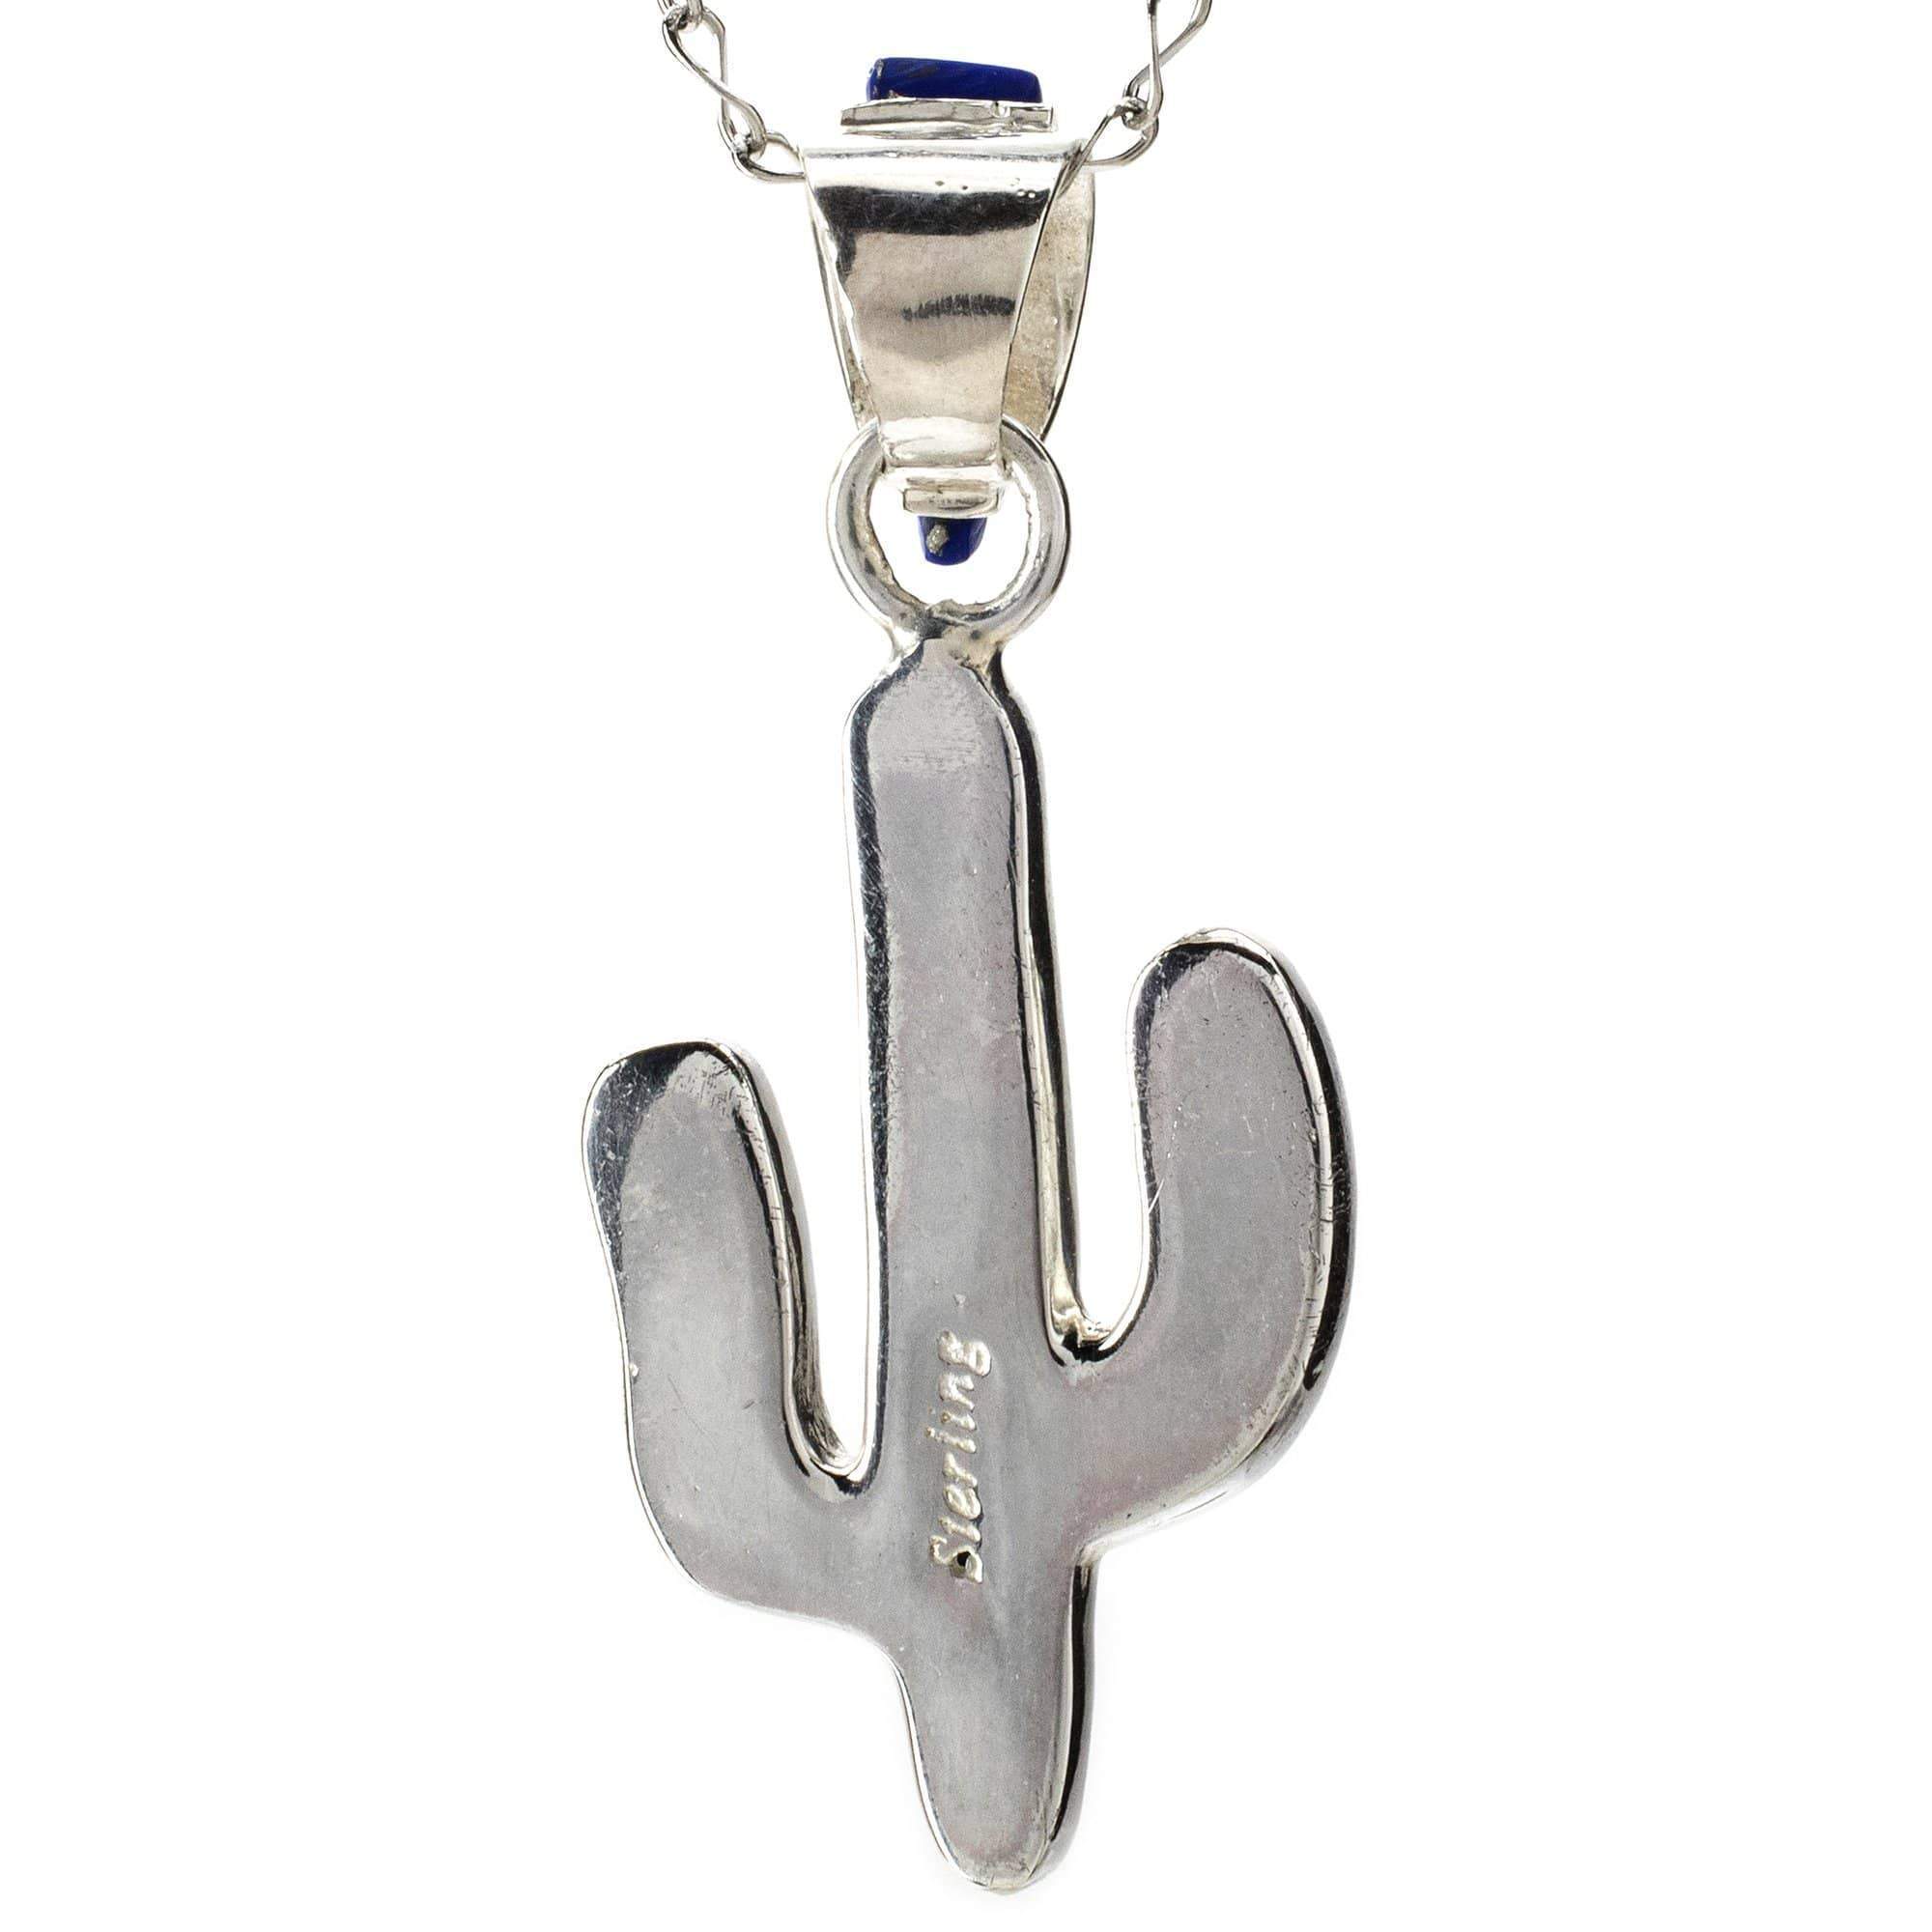 Kalifano Southwest Silver Jewelry Lapis Cactus 925 Sterling Silver Pendant USA Handmade with Aqua Opal Accent NMN.0602.LP